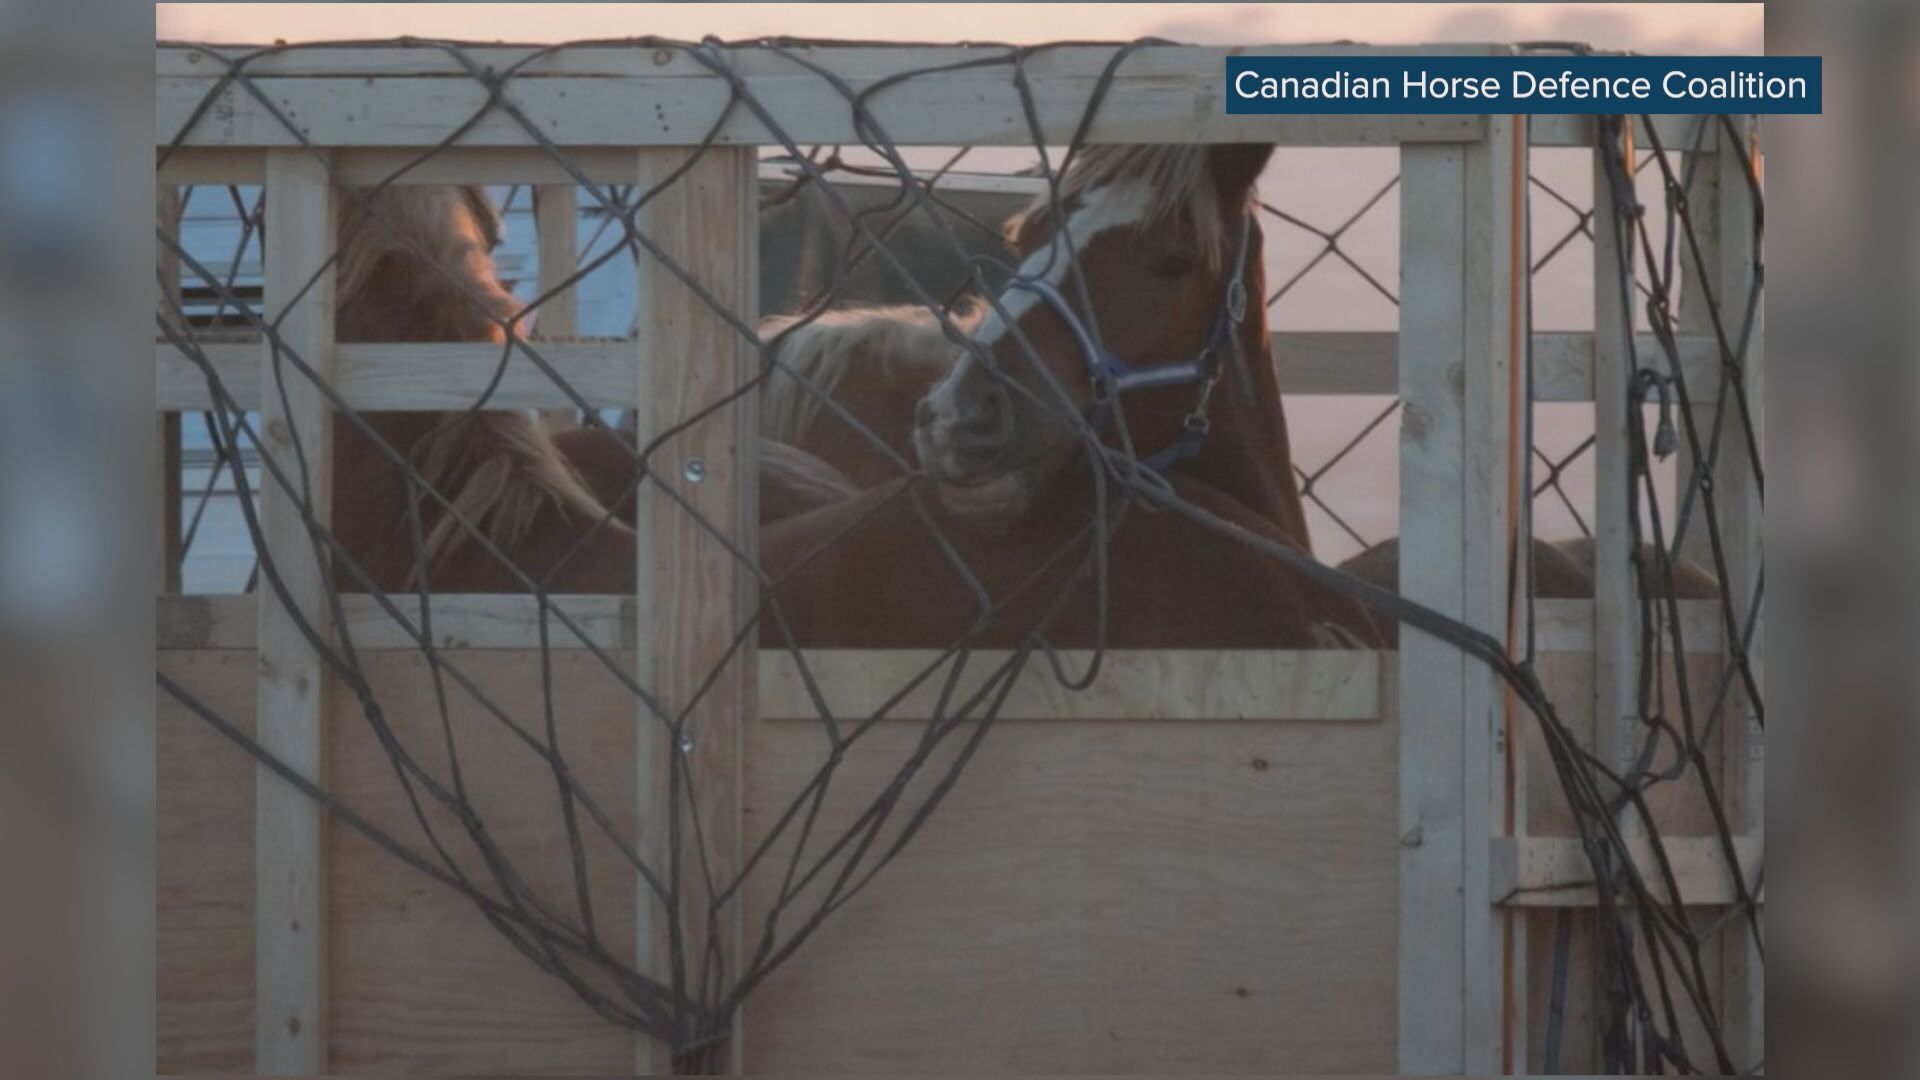 Animal welfare advocated bring charge against live-horse exporter from Manitoba